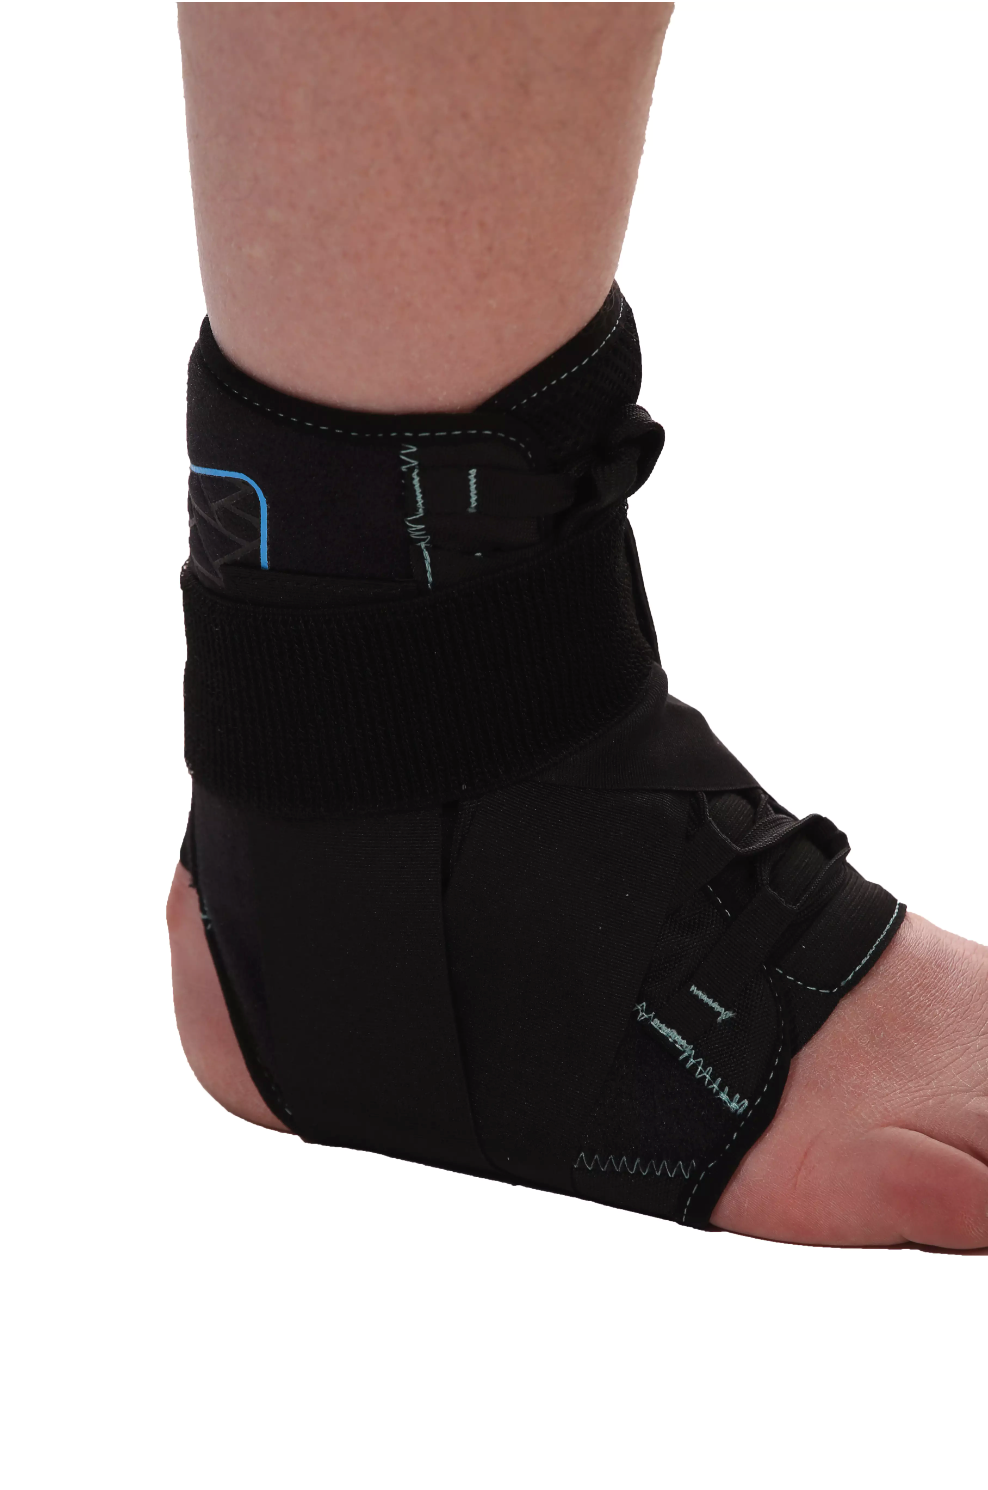 Trainers Choice Kinetic Panel Sao Stabilizing Ankle Brace Size Small